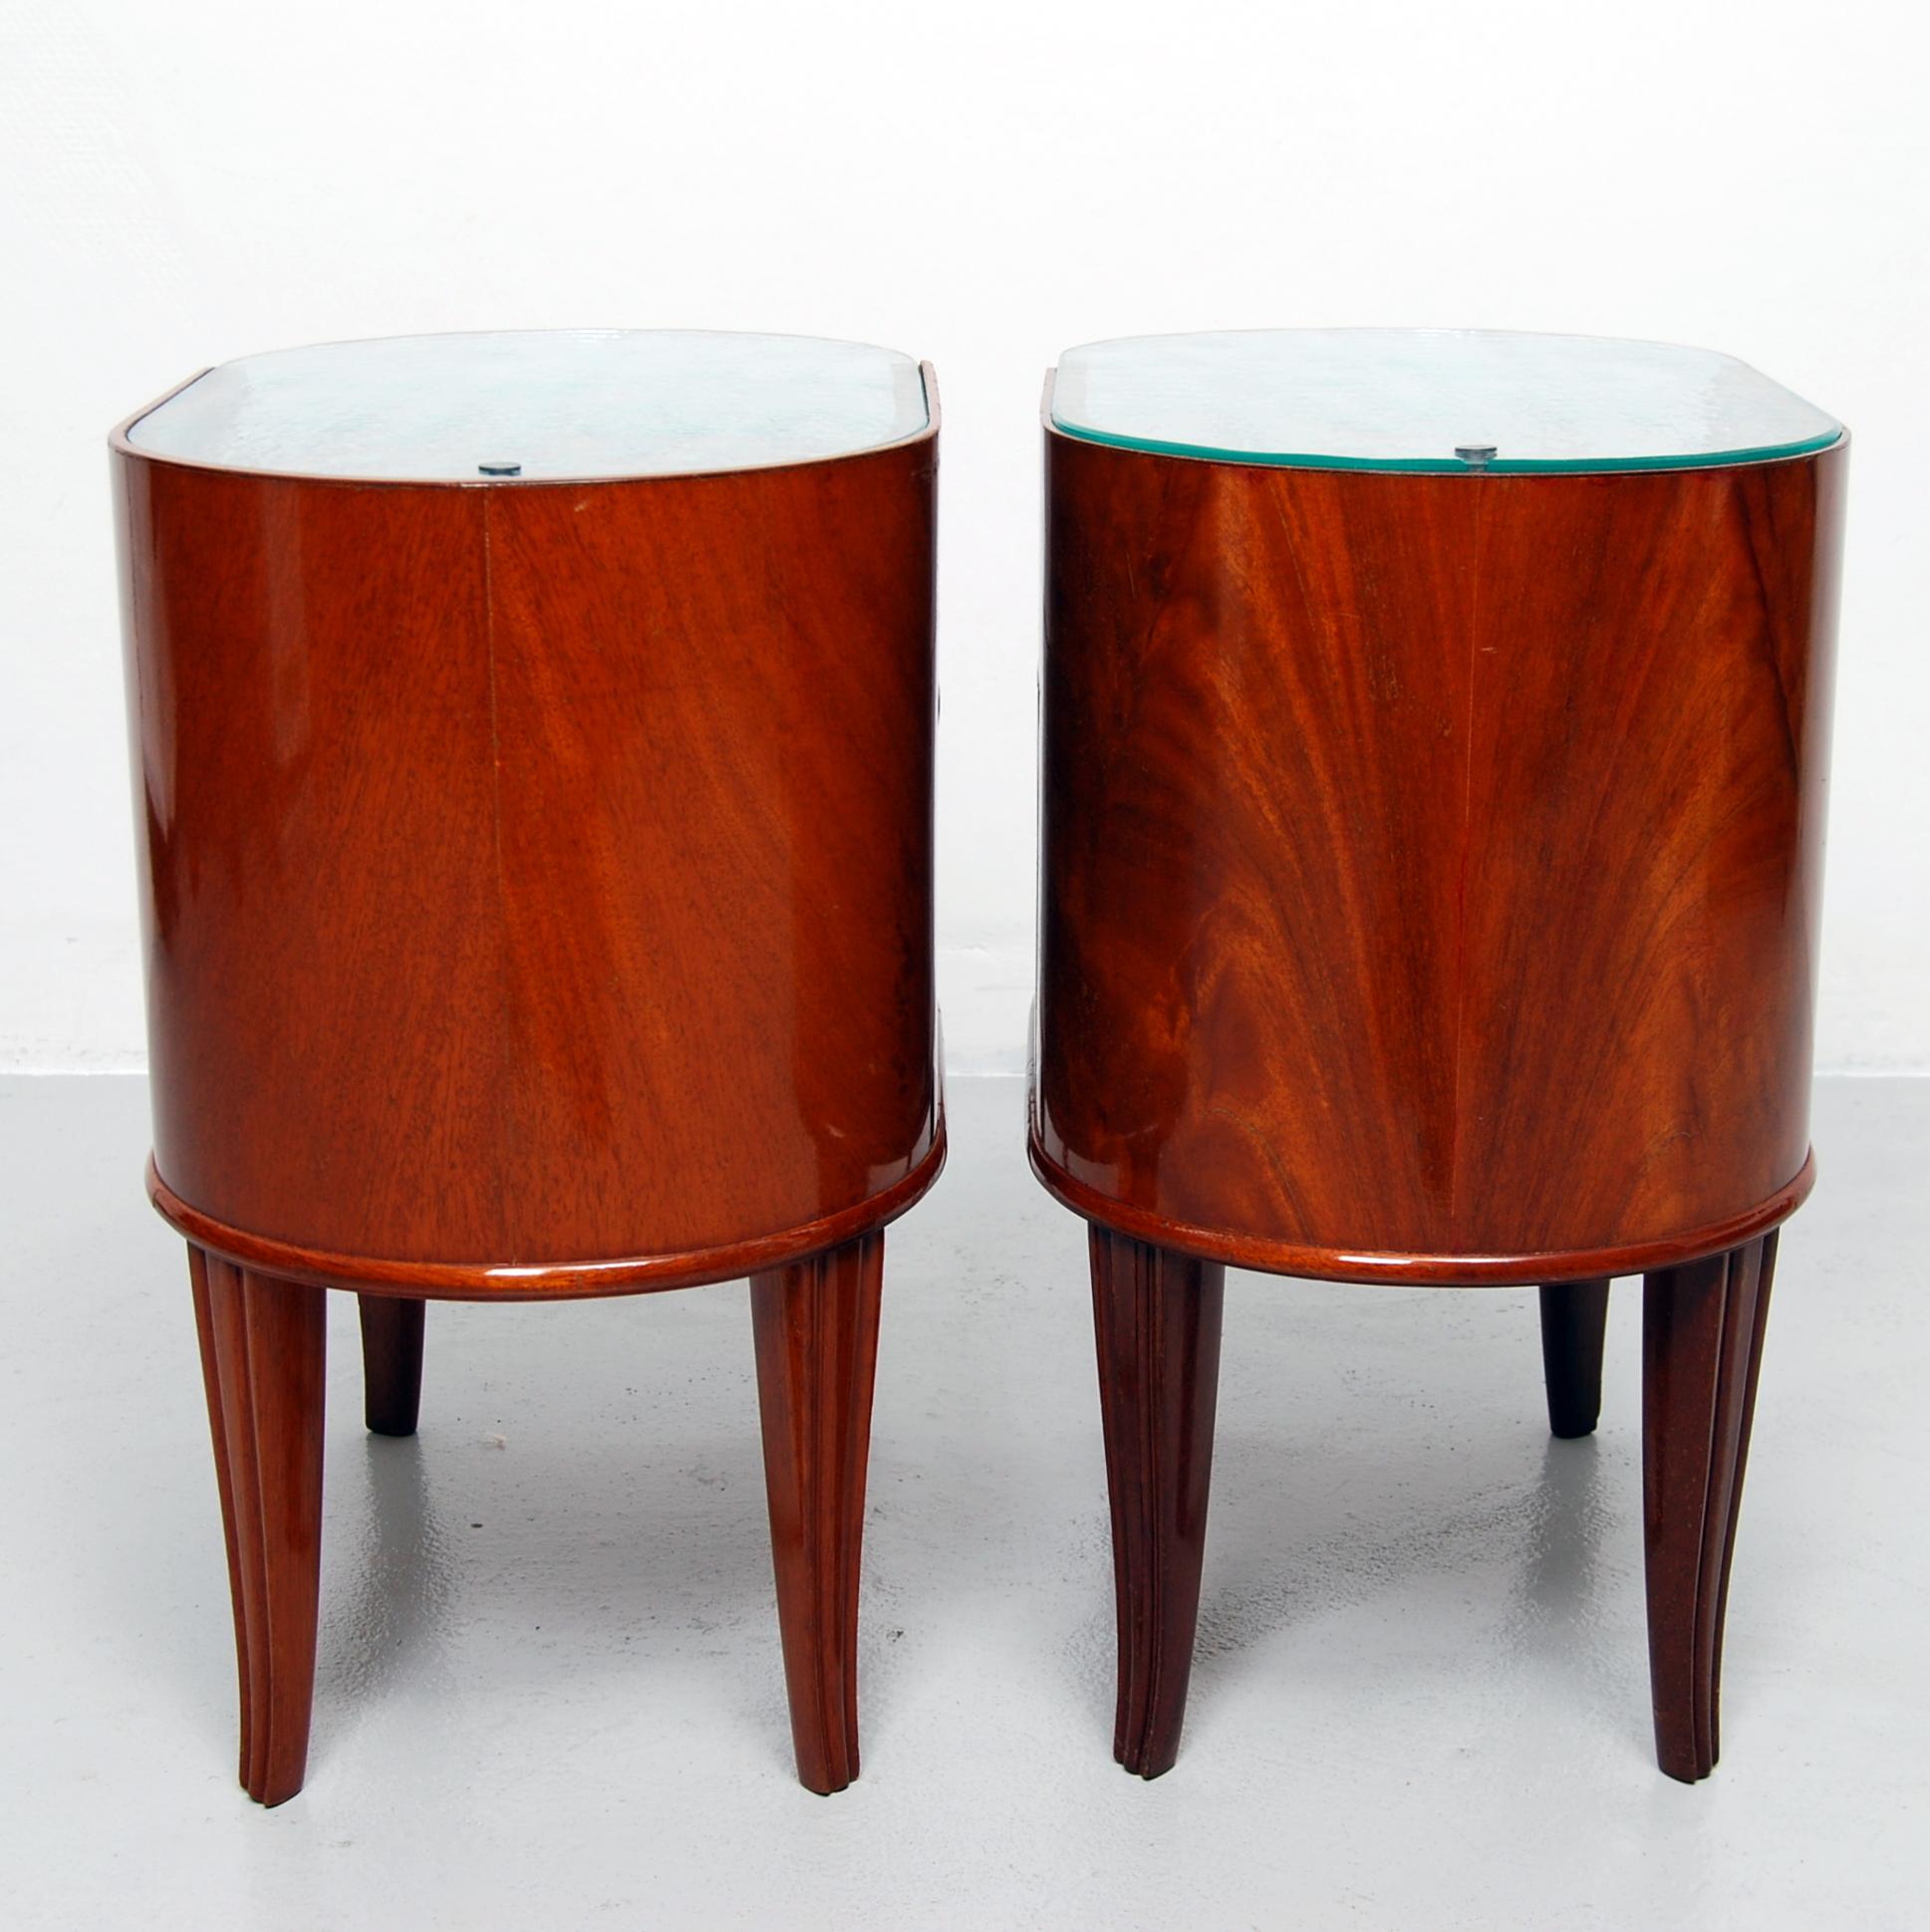 Wood Rare Pair of Bedside Tables or Nightstands by Axel Larsson Produced by SMF